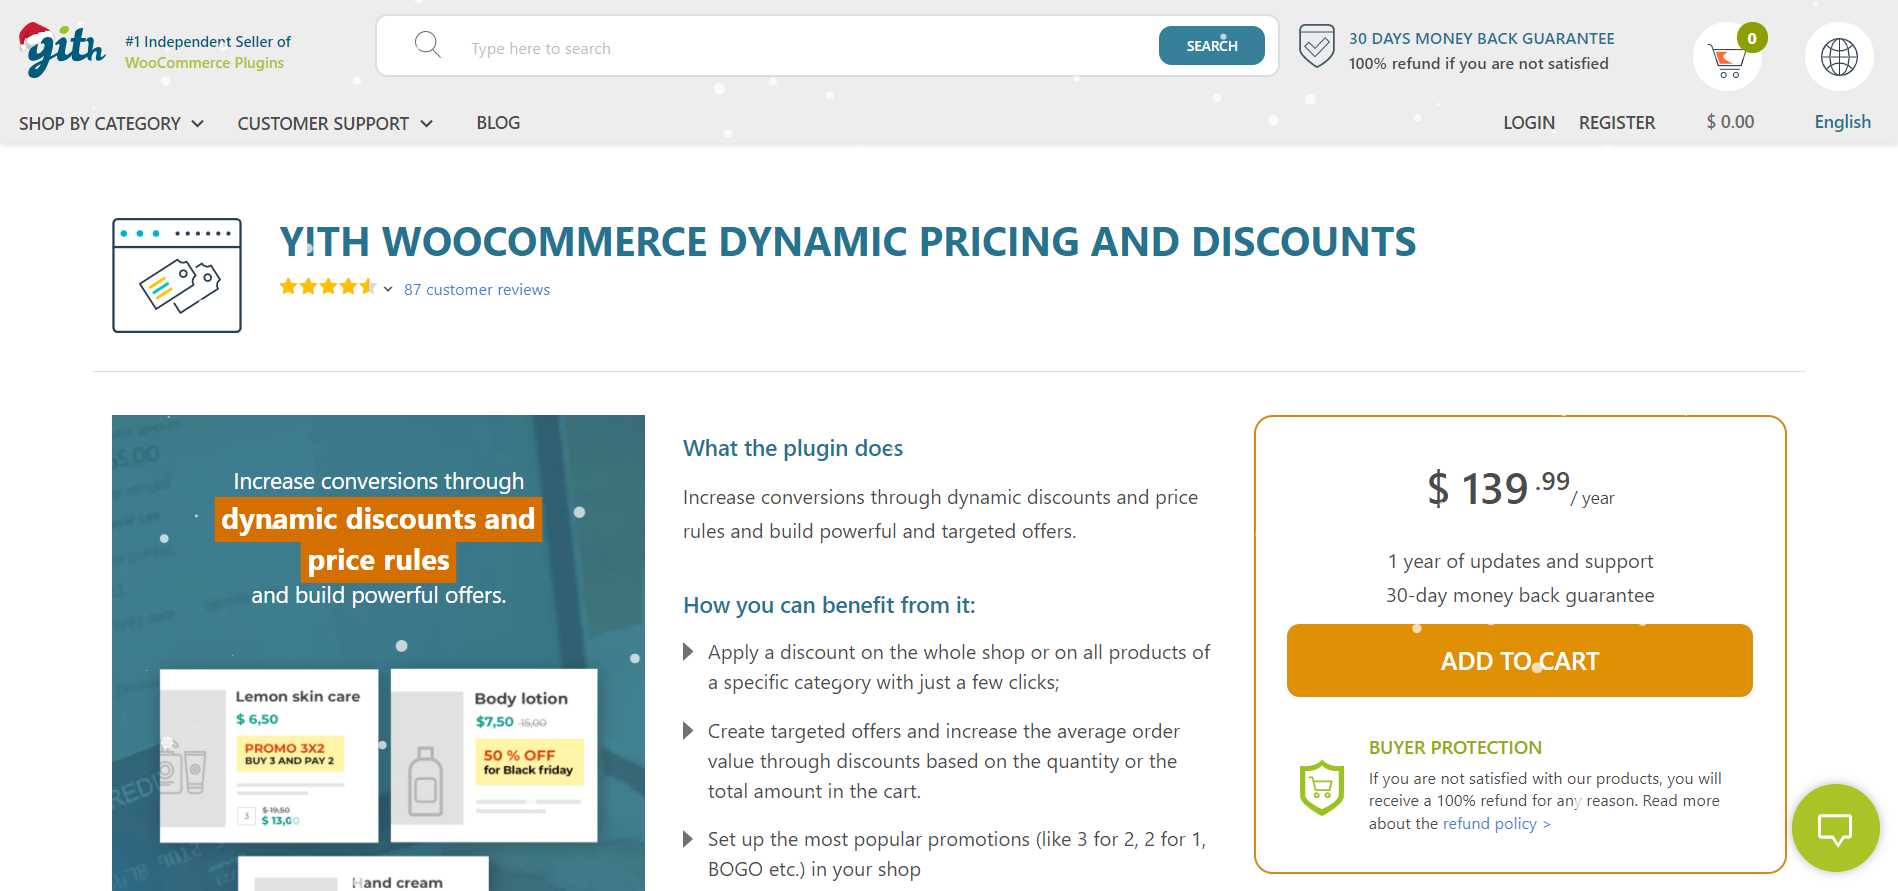 YITH WooCommerce dynamic pricing 